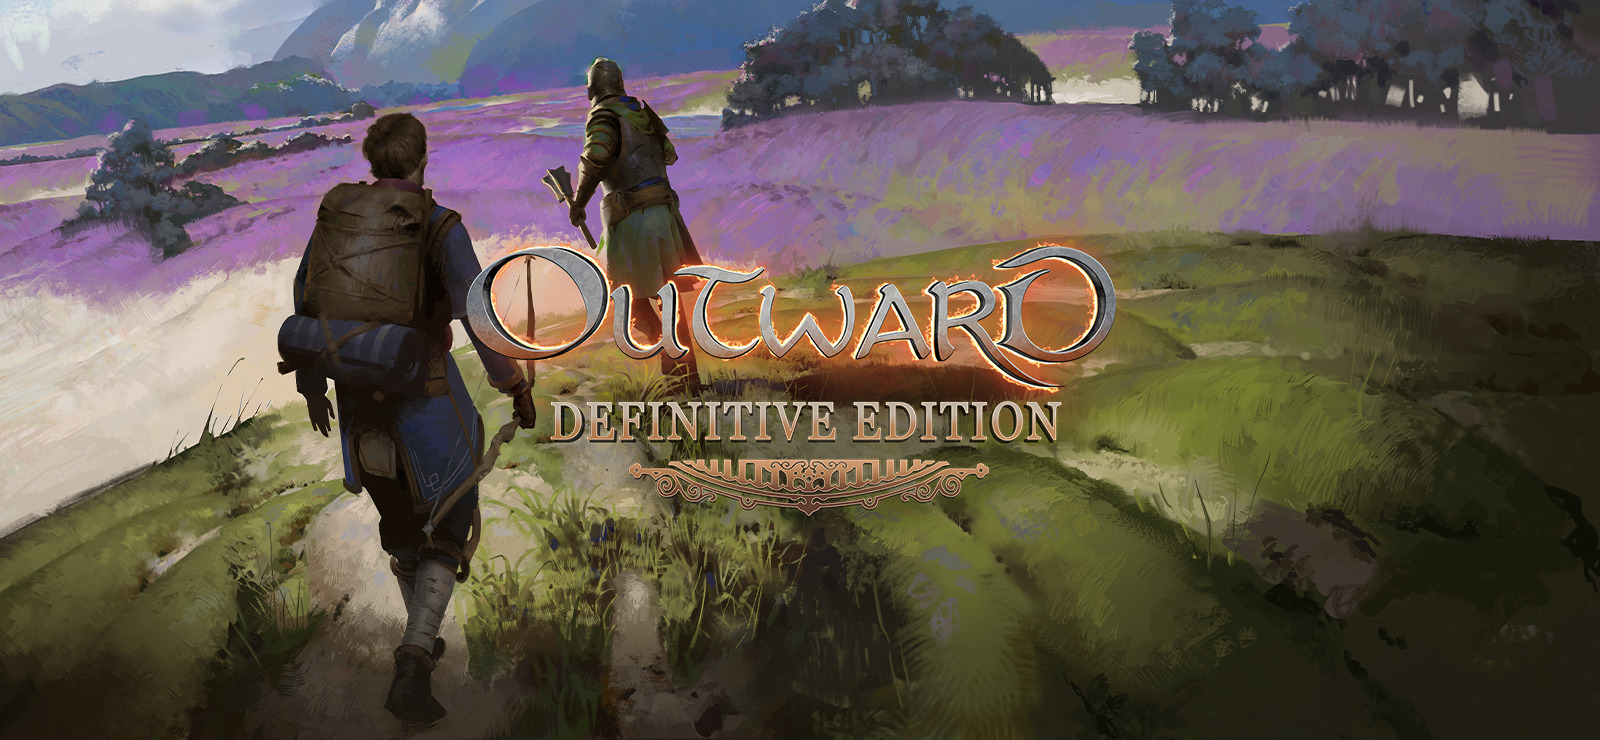 Outward brings unique open-world RPG adventuring to Xbox One, PS4